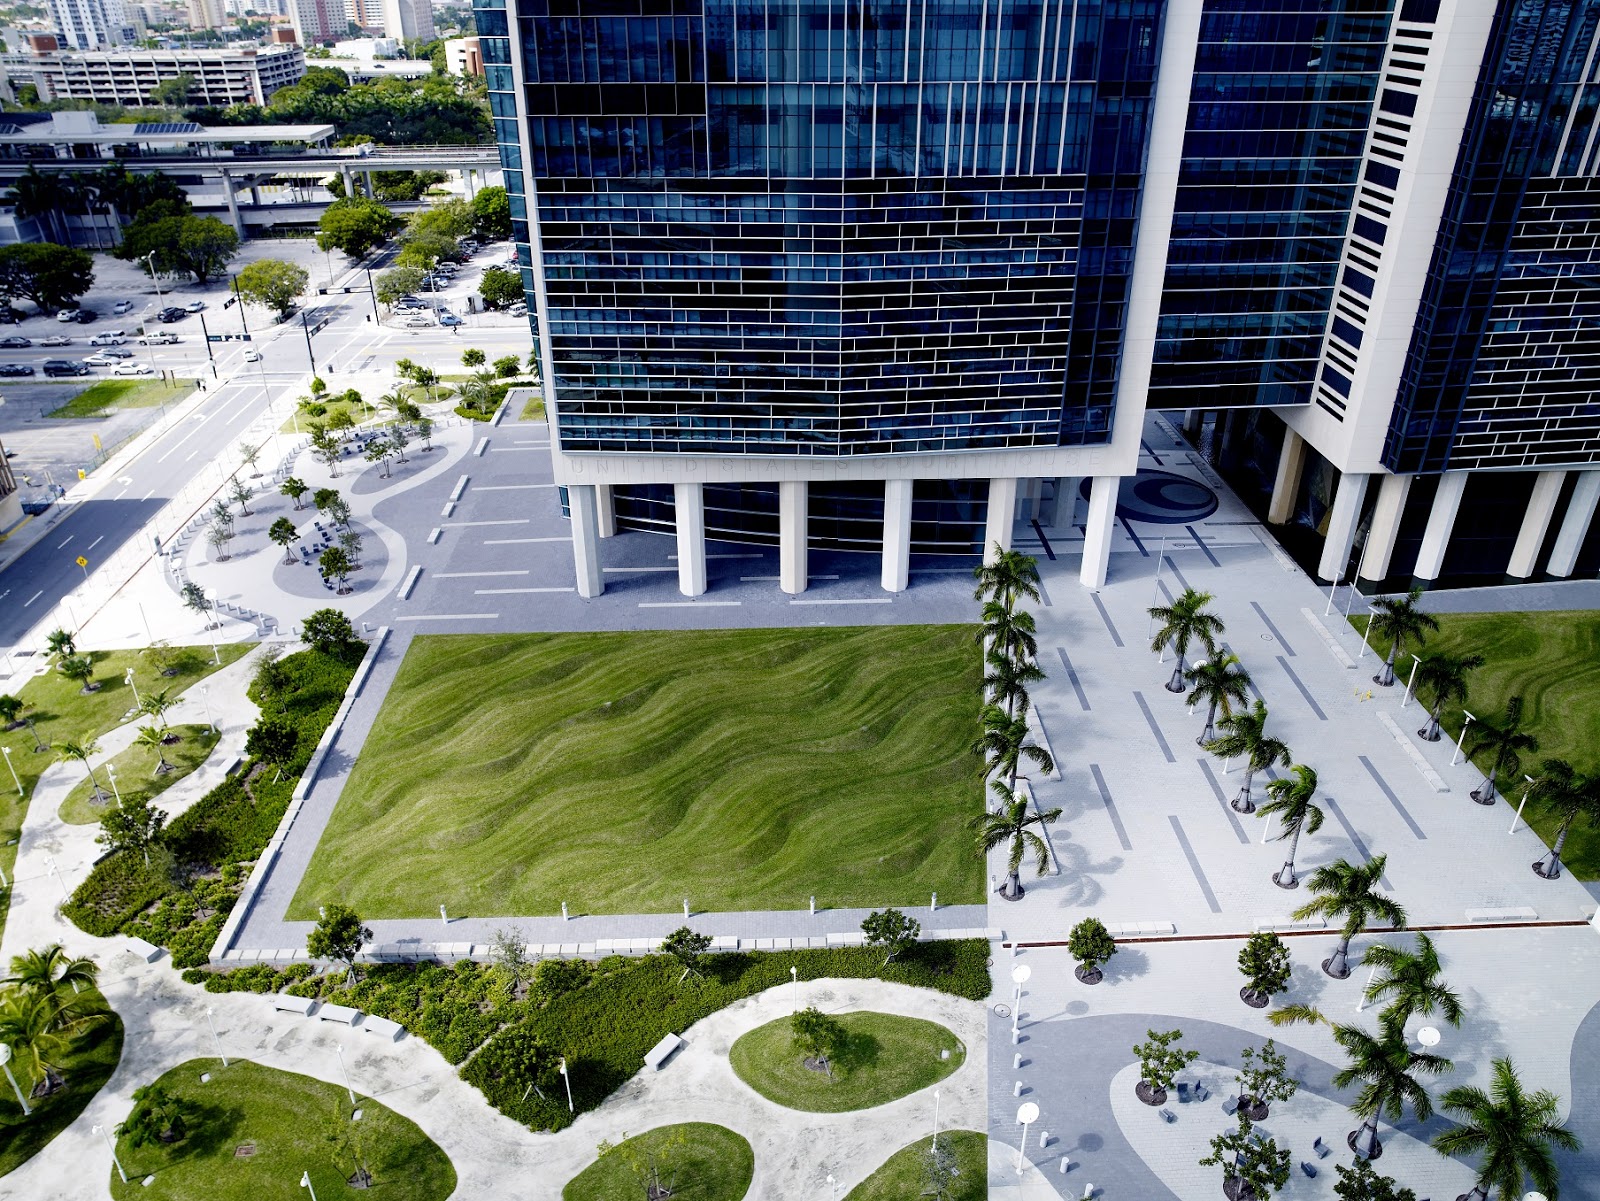 An aerial view of Flutter, by Maya Lin, showing a pair of sculpted lawns that mimic rippling water or sand.